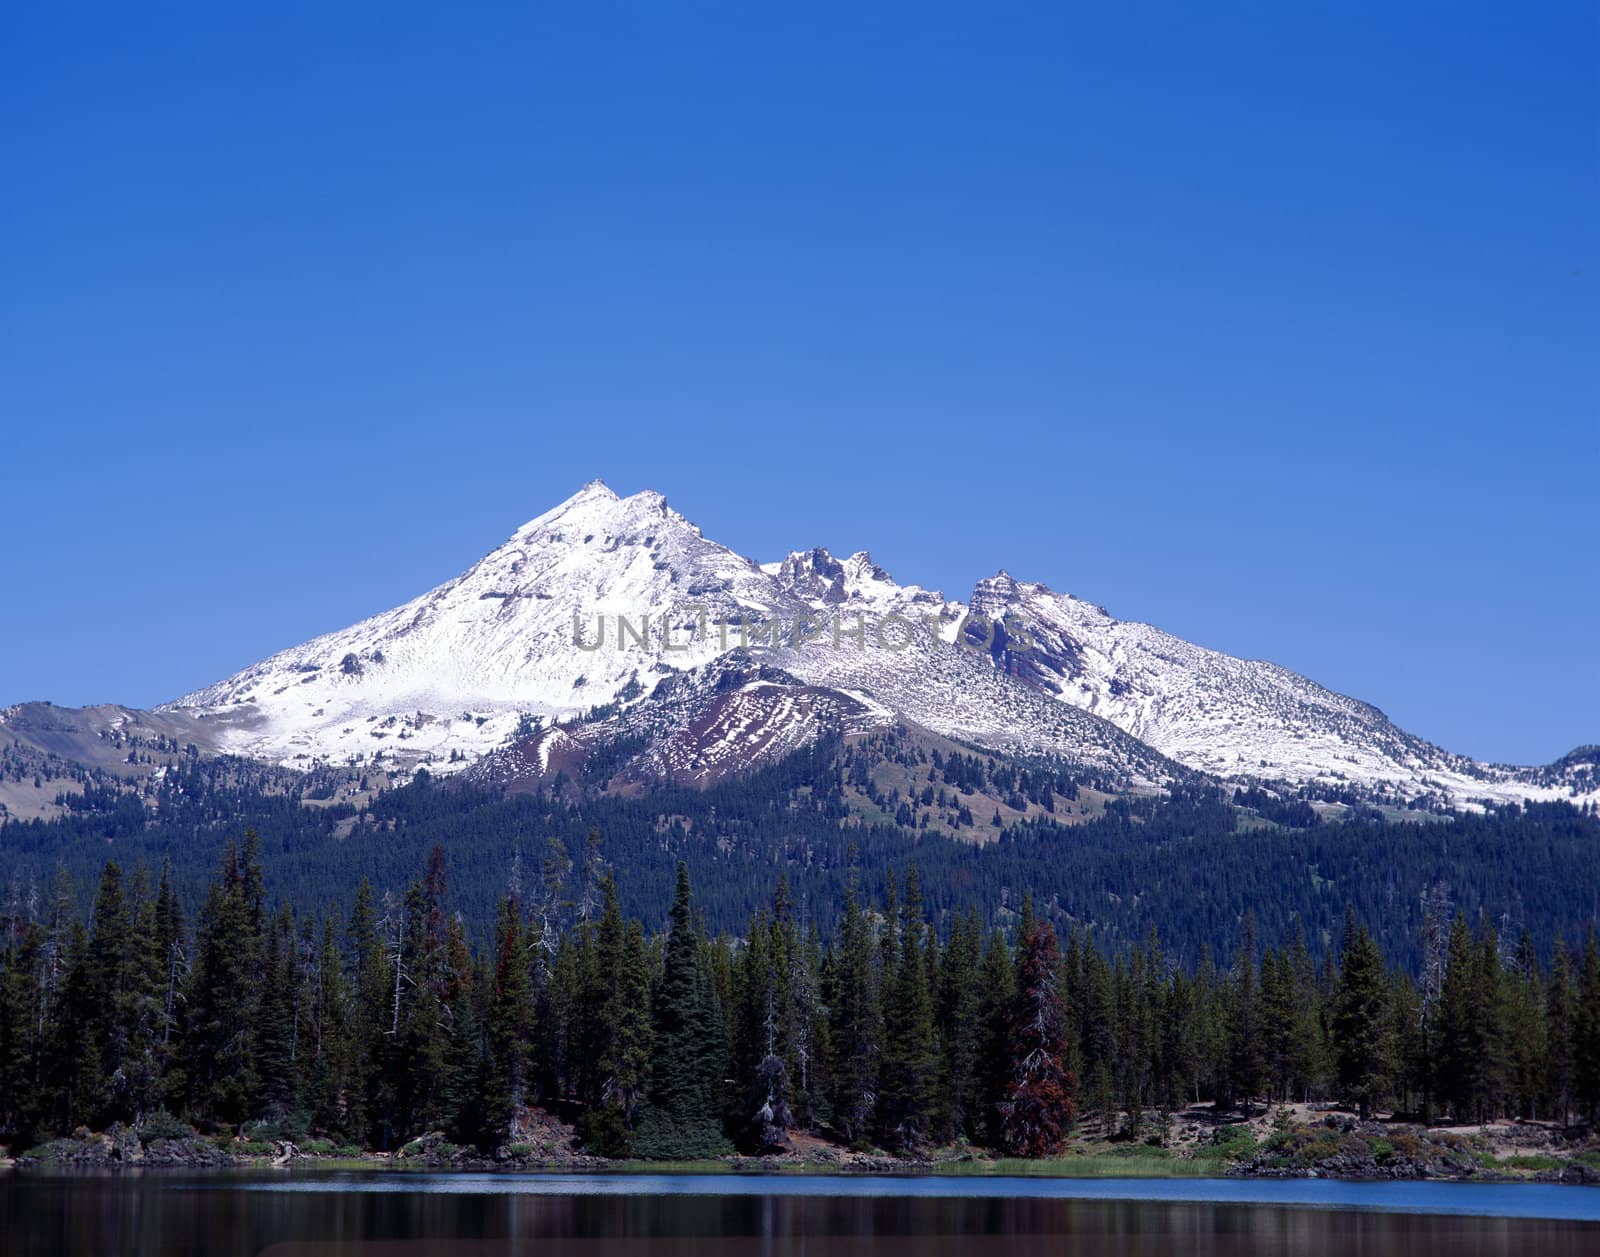 Snow covered mountain in the Cascades range next to a clear lake and pine tree forest